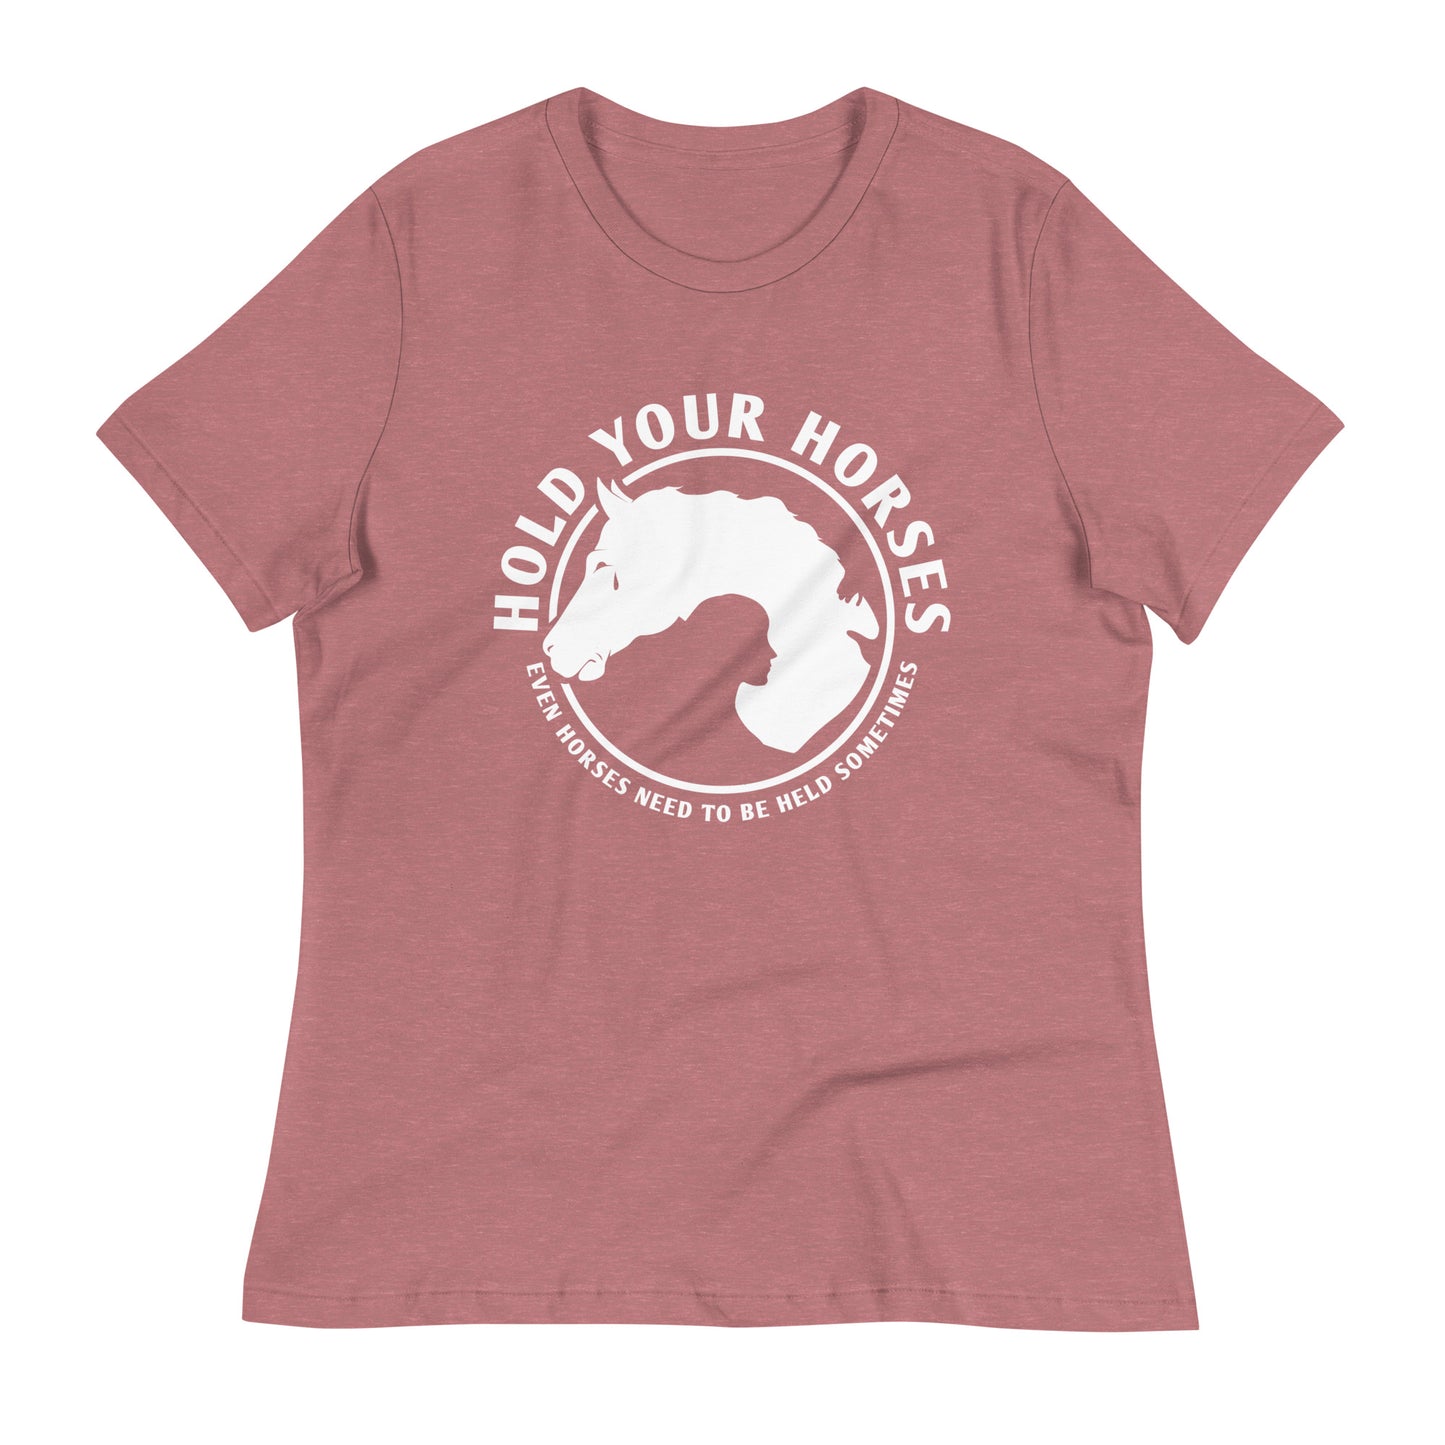 Hold Your Horses Women's Signature Tee